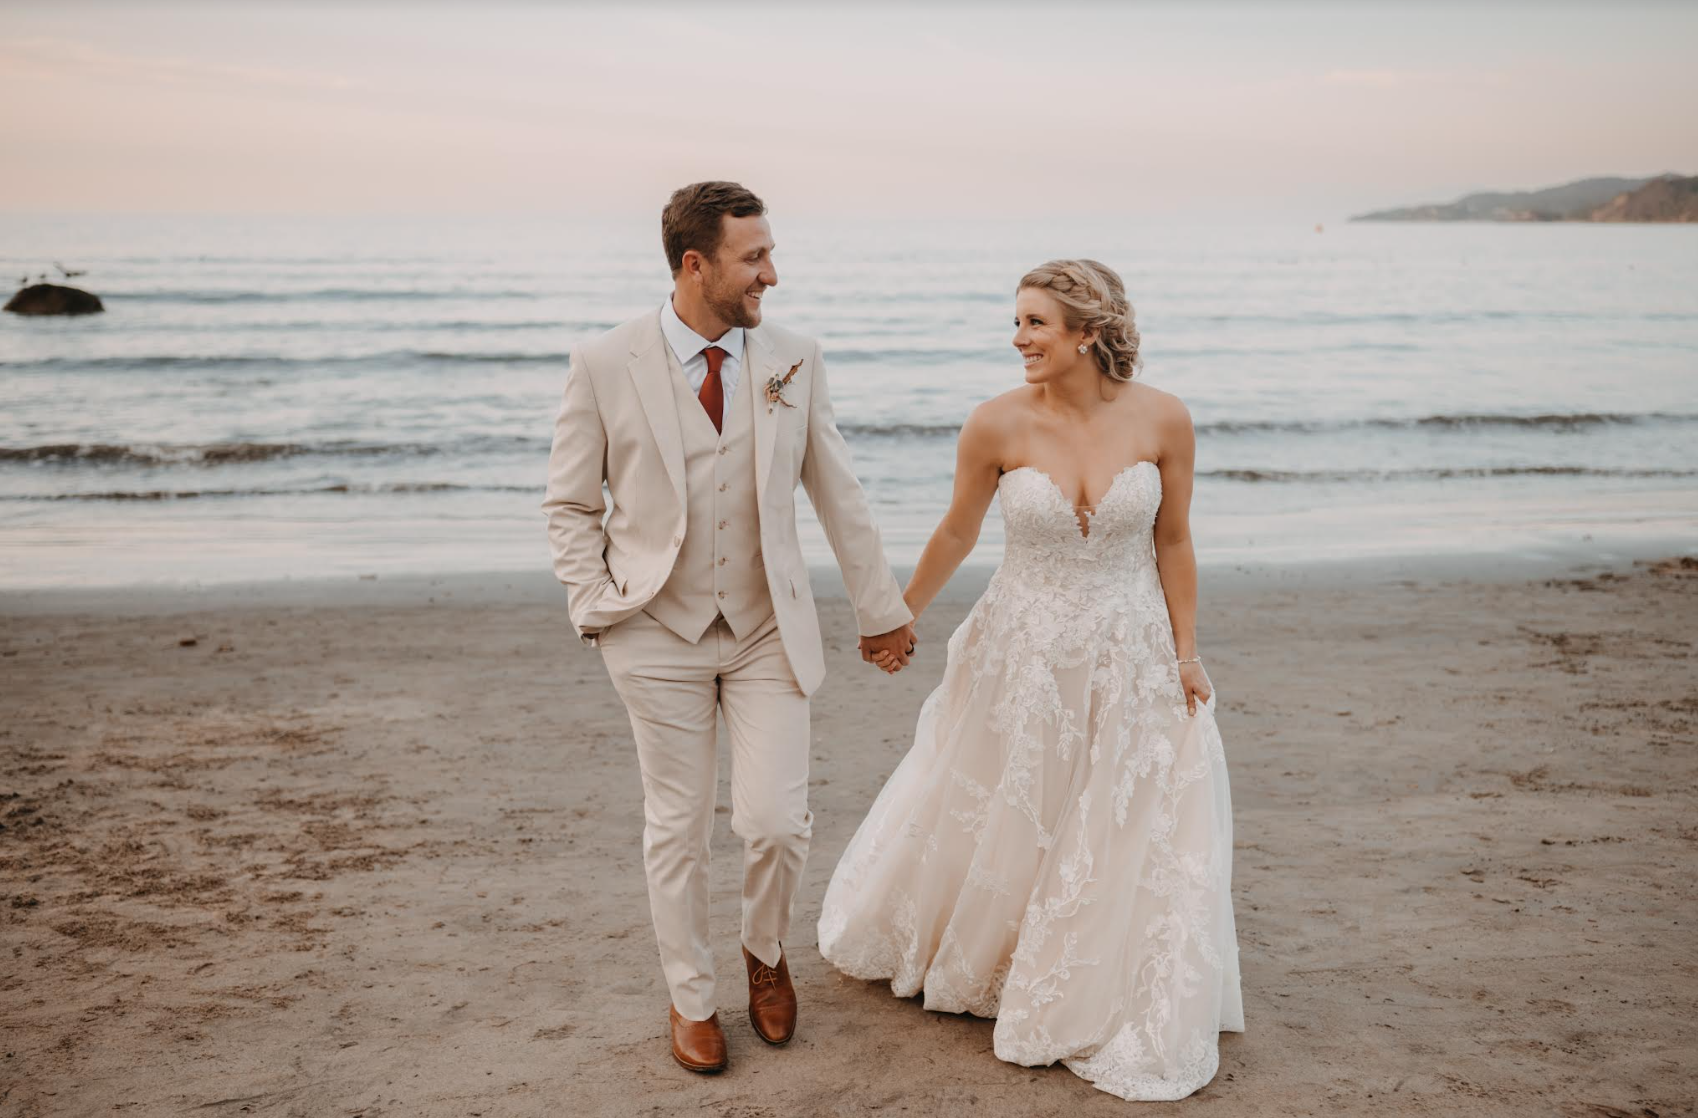 Sayulita Life Featured Business: From The Soul Weddings